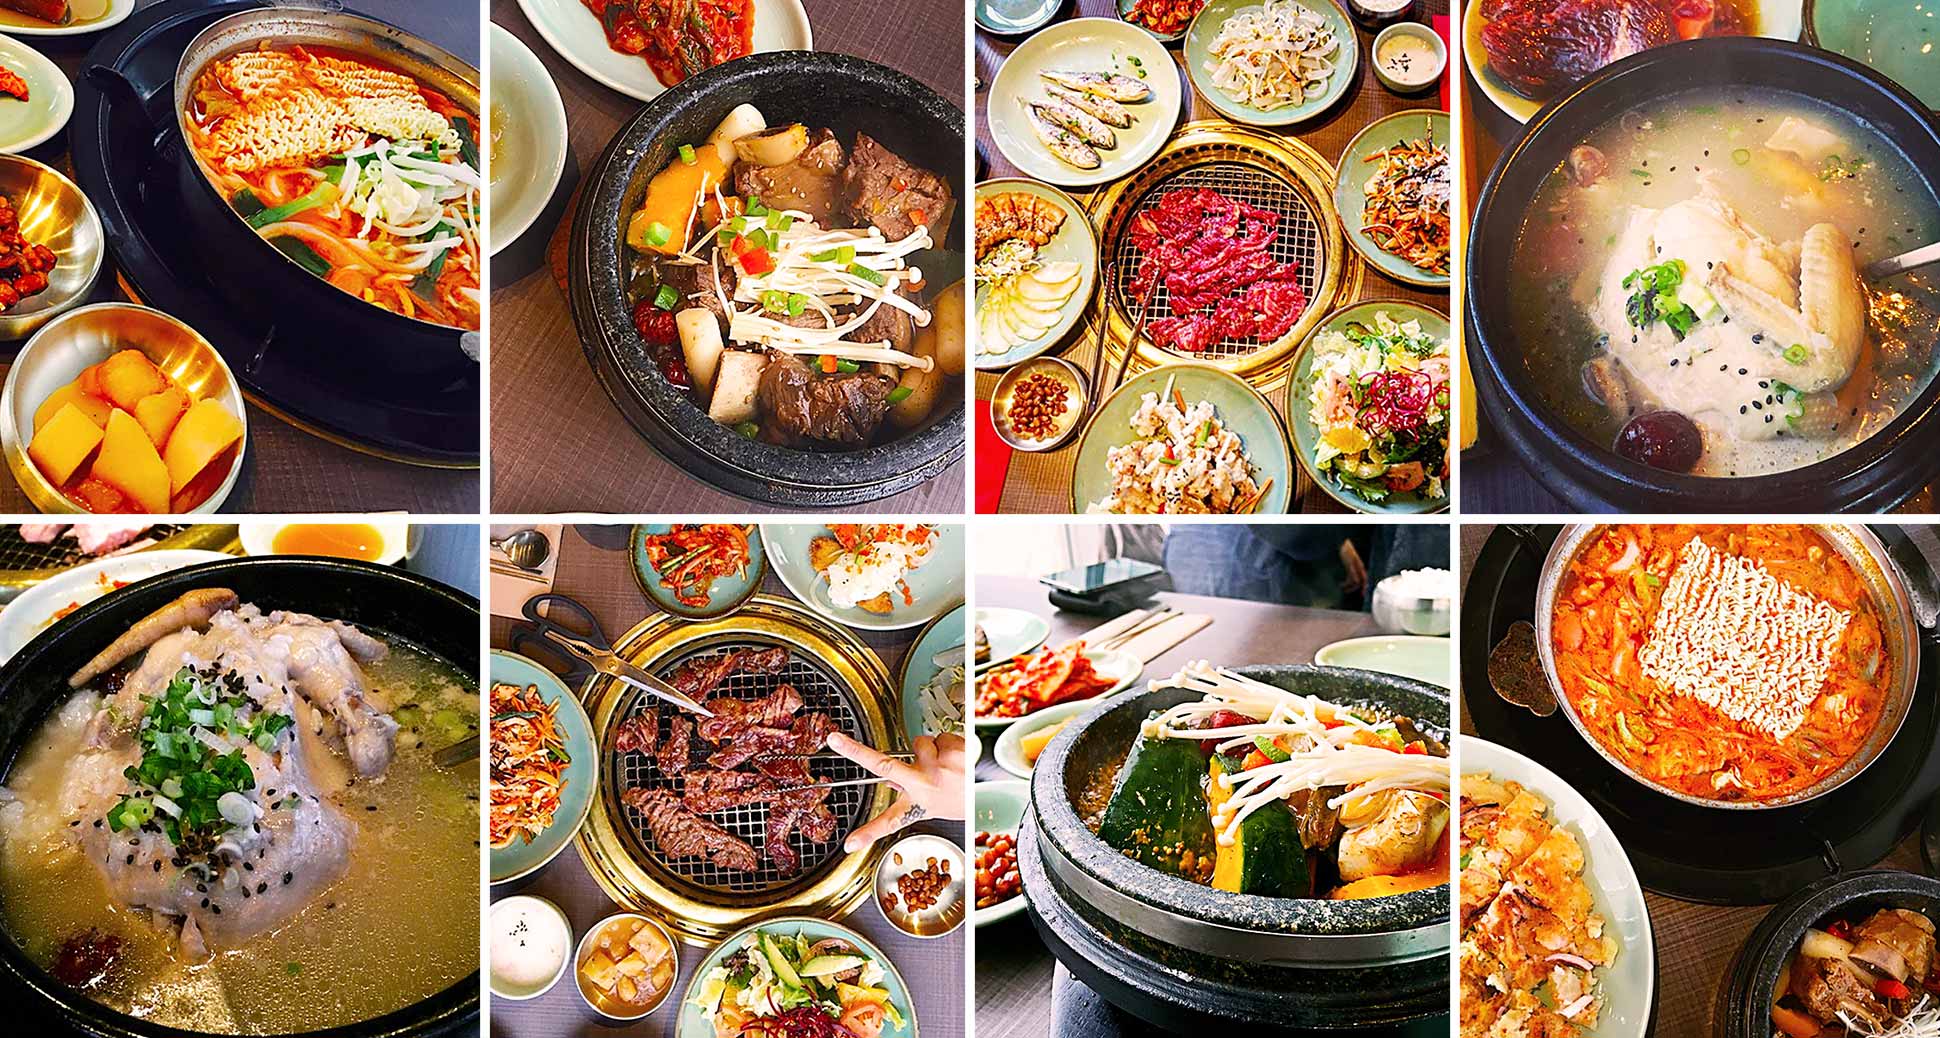 4 Best Korean Food For When It’s Cold Outside